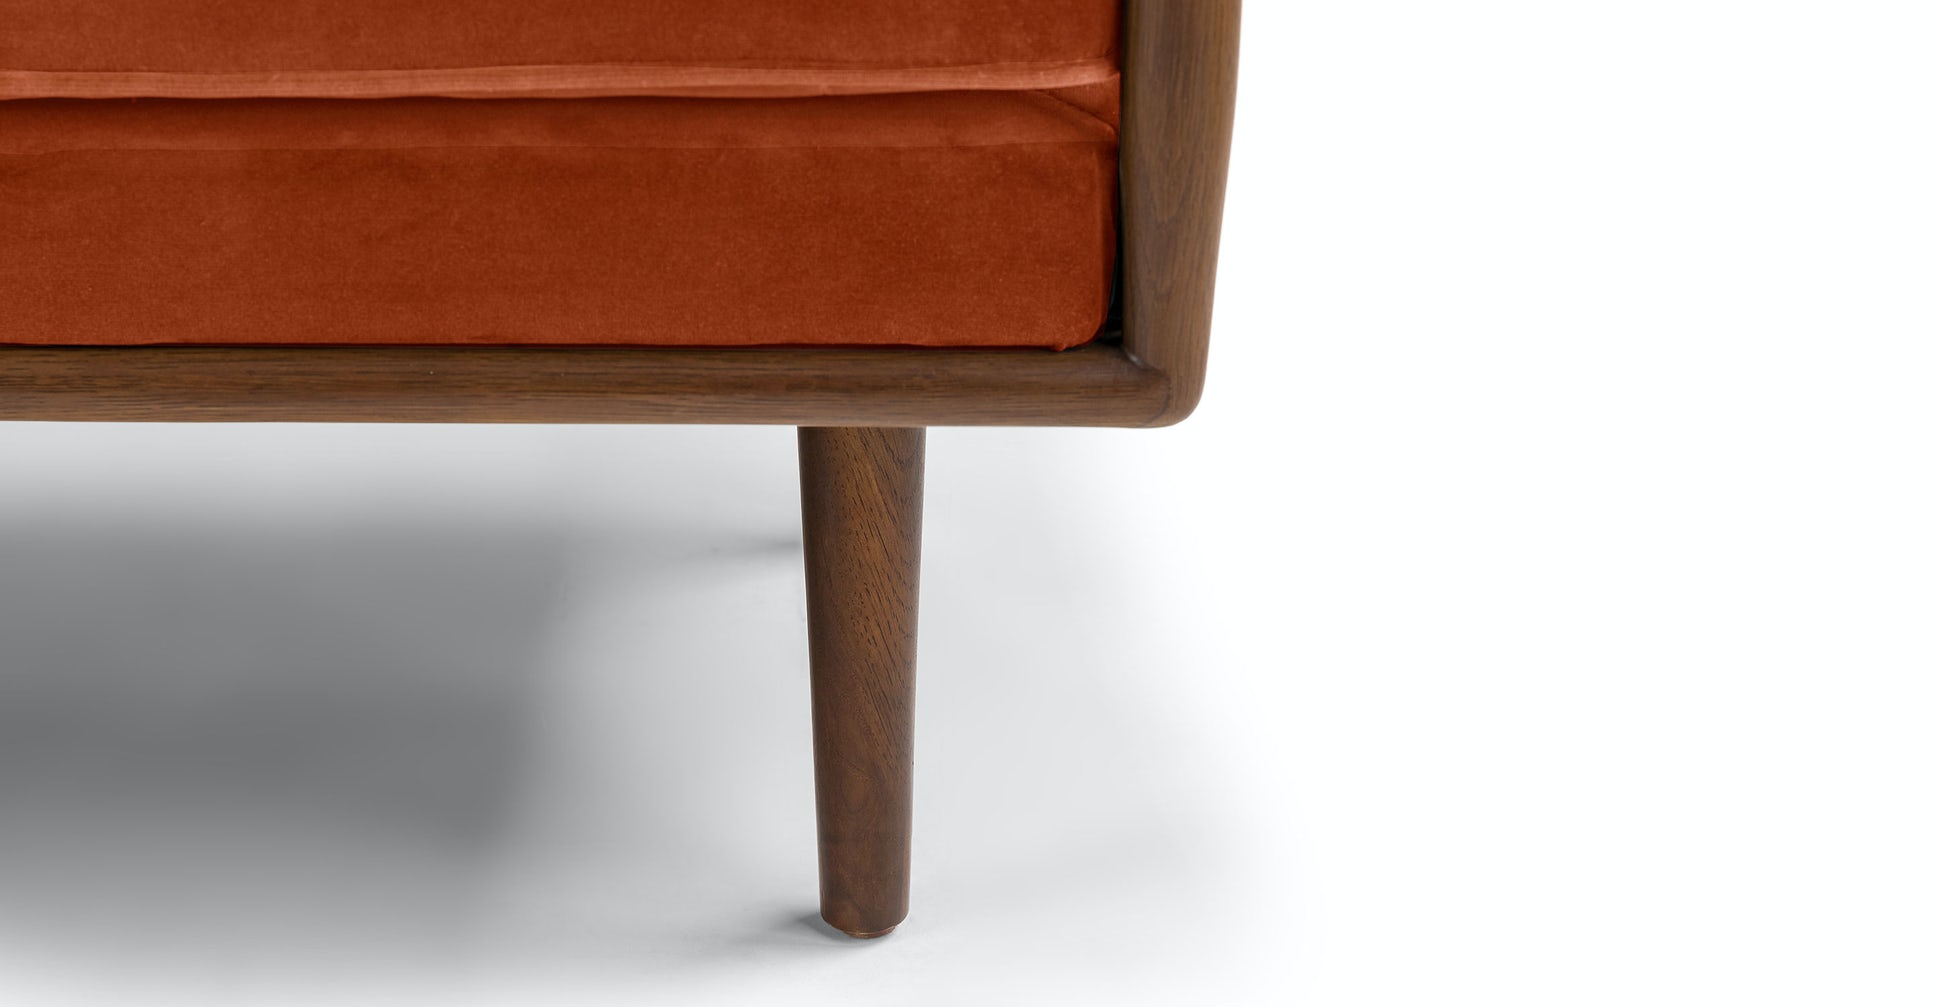 Ansa Bench, Charme Tan - Article | Havenly